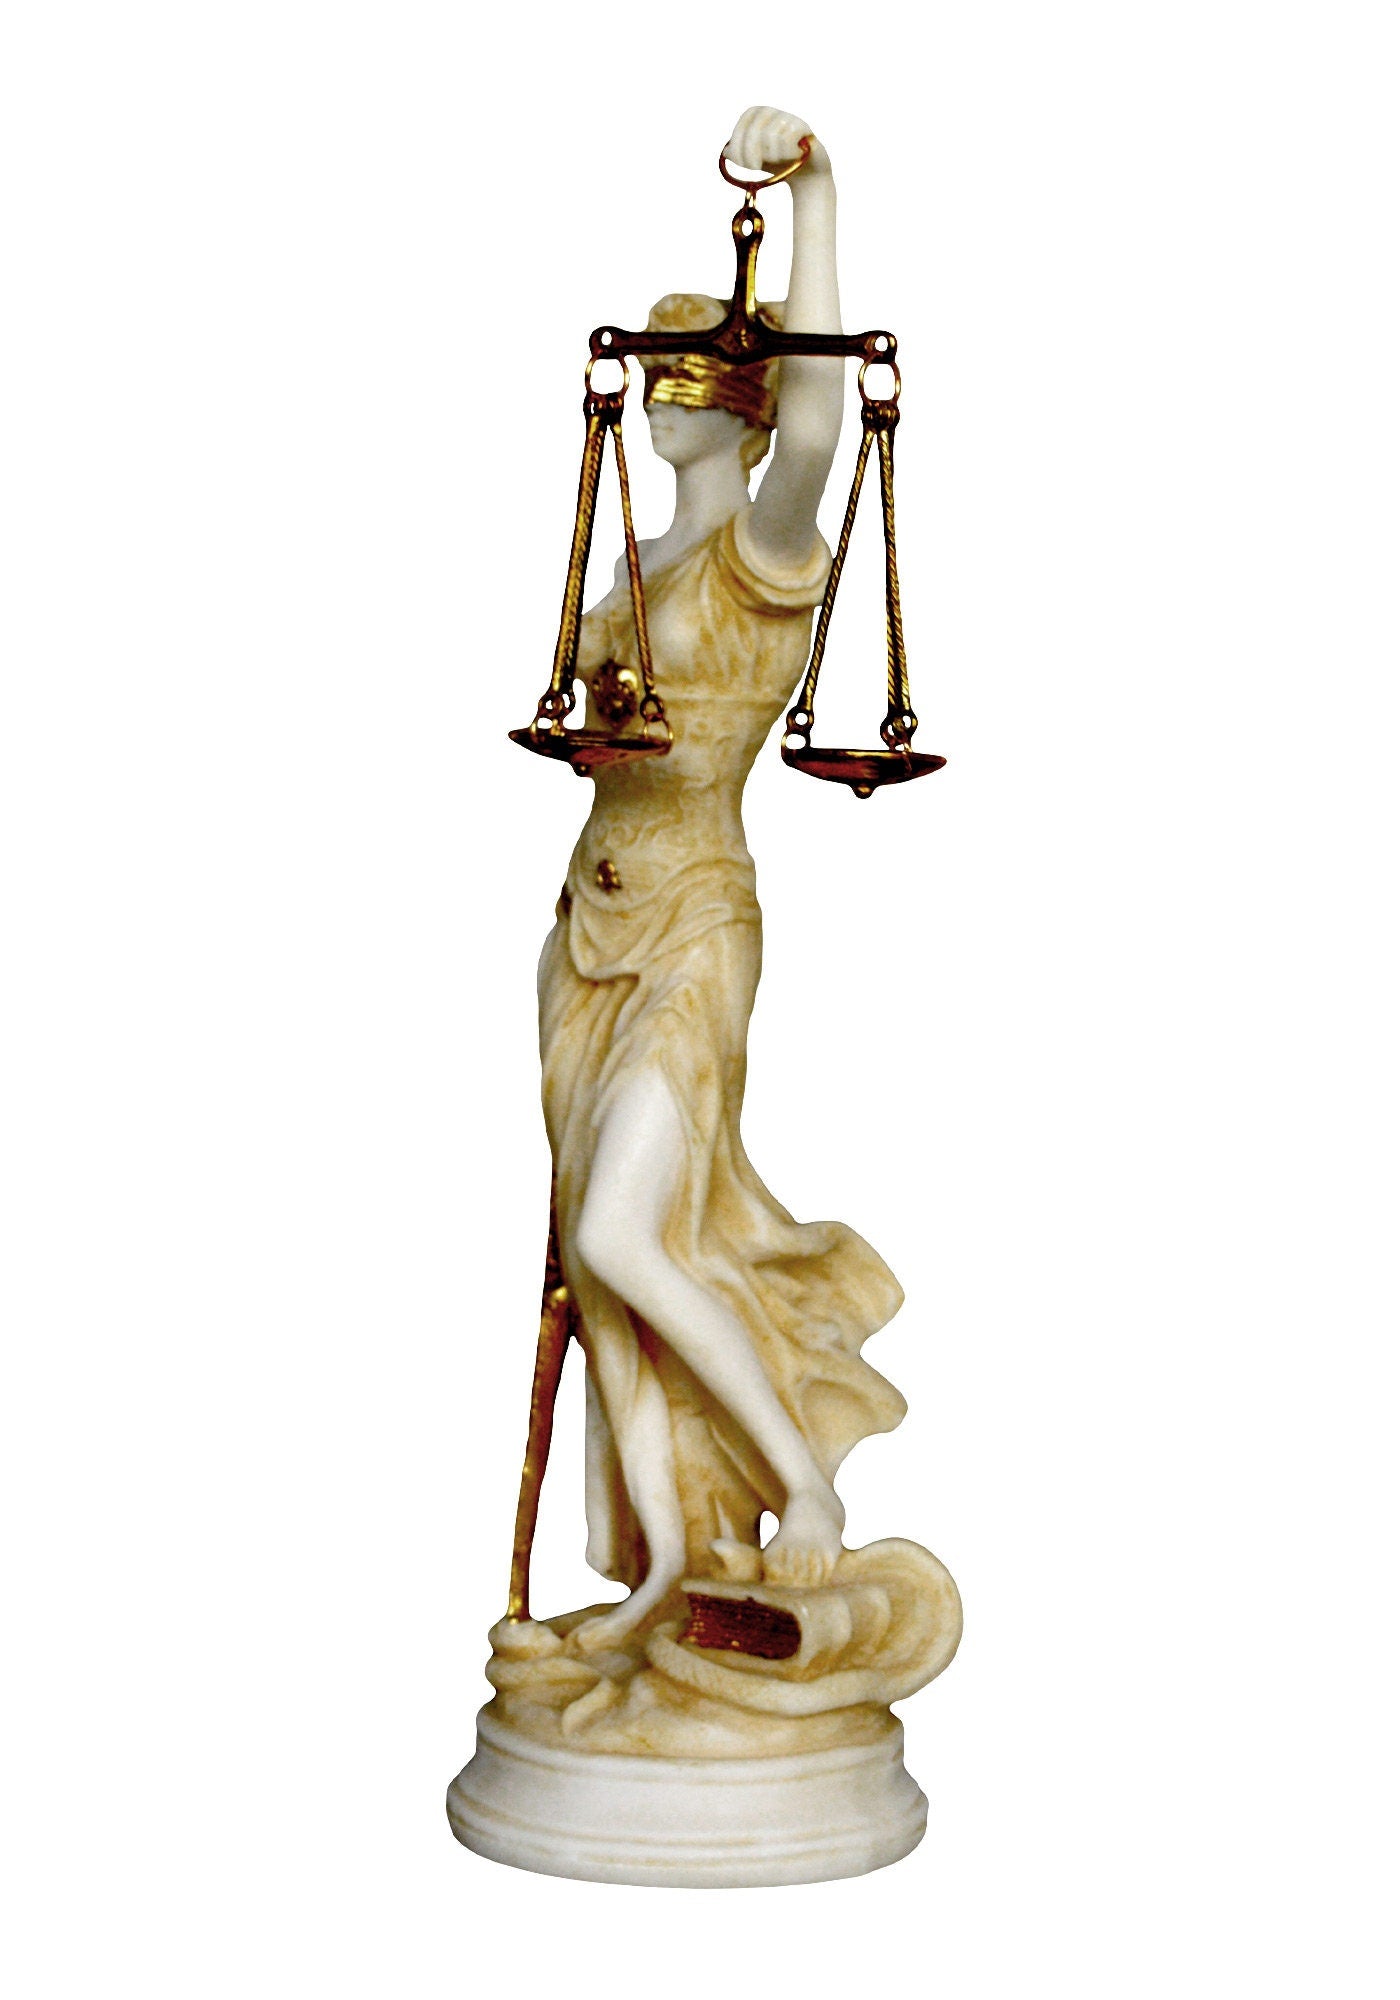 Themis Justitia - Greek Roman Goddess of Divine Law and Order, Fairness, Natural Law and Custom - Aged Alabaster Statue